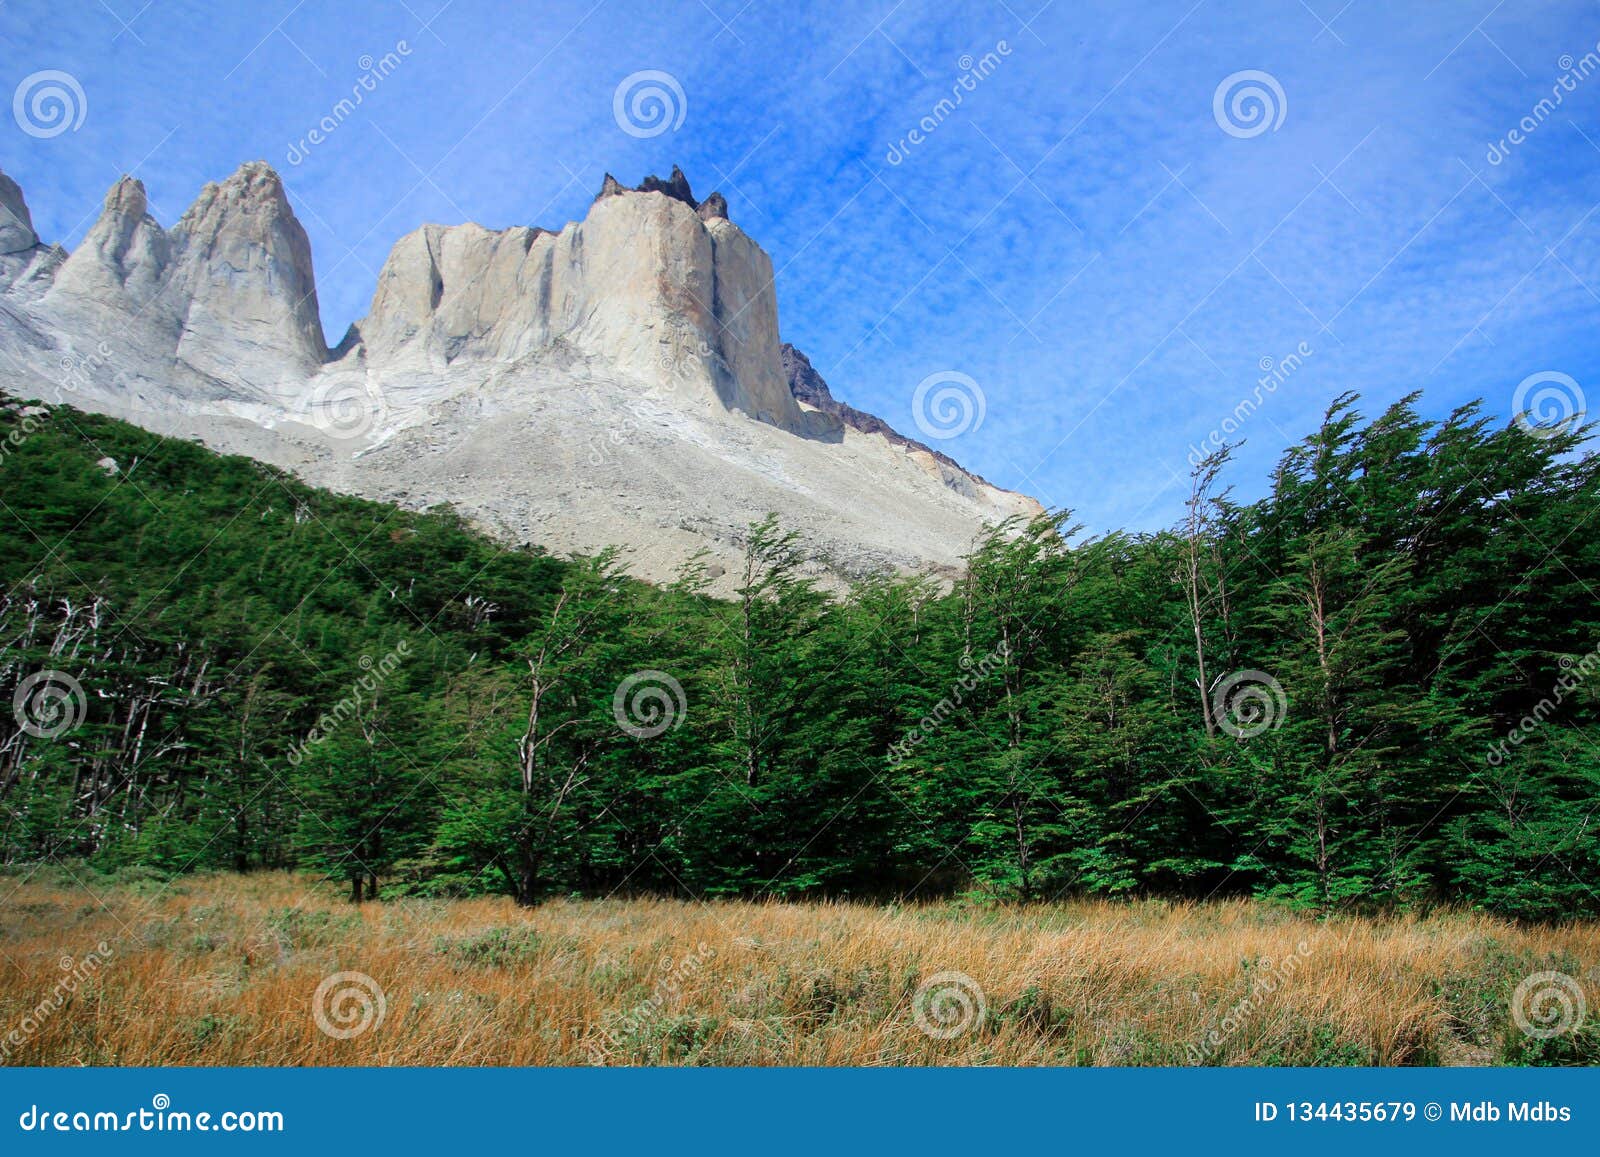 cuerno principal and the valle frances, torres del paine national park. patagonia, chile